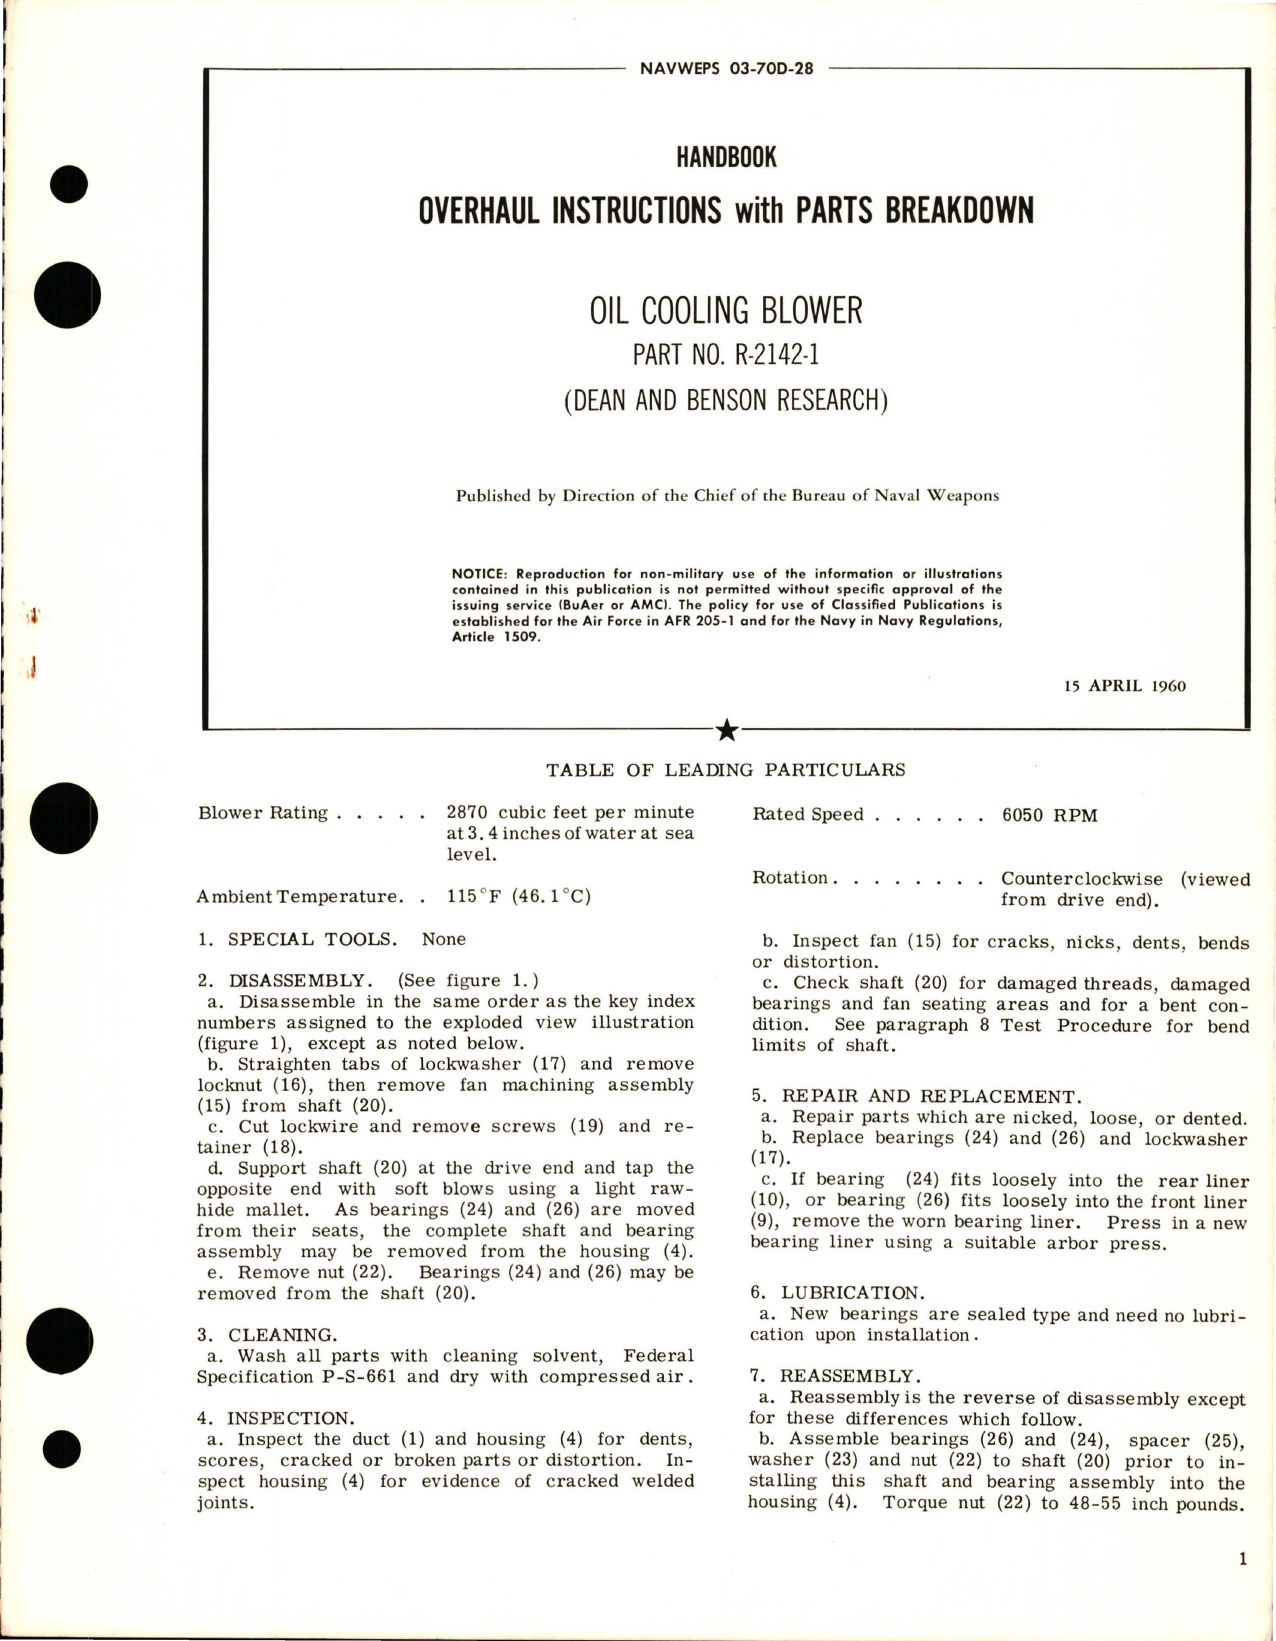 Sample page 1 from AirCorps Library document: Overhaul Instructions with Parts Breakdown for Oil Cooling Blower - Part R-2142-1